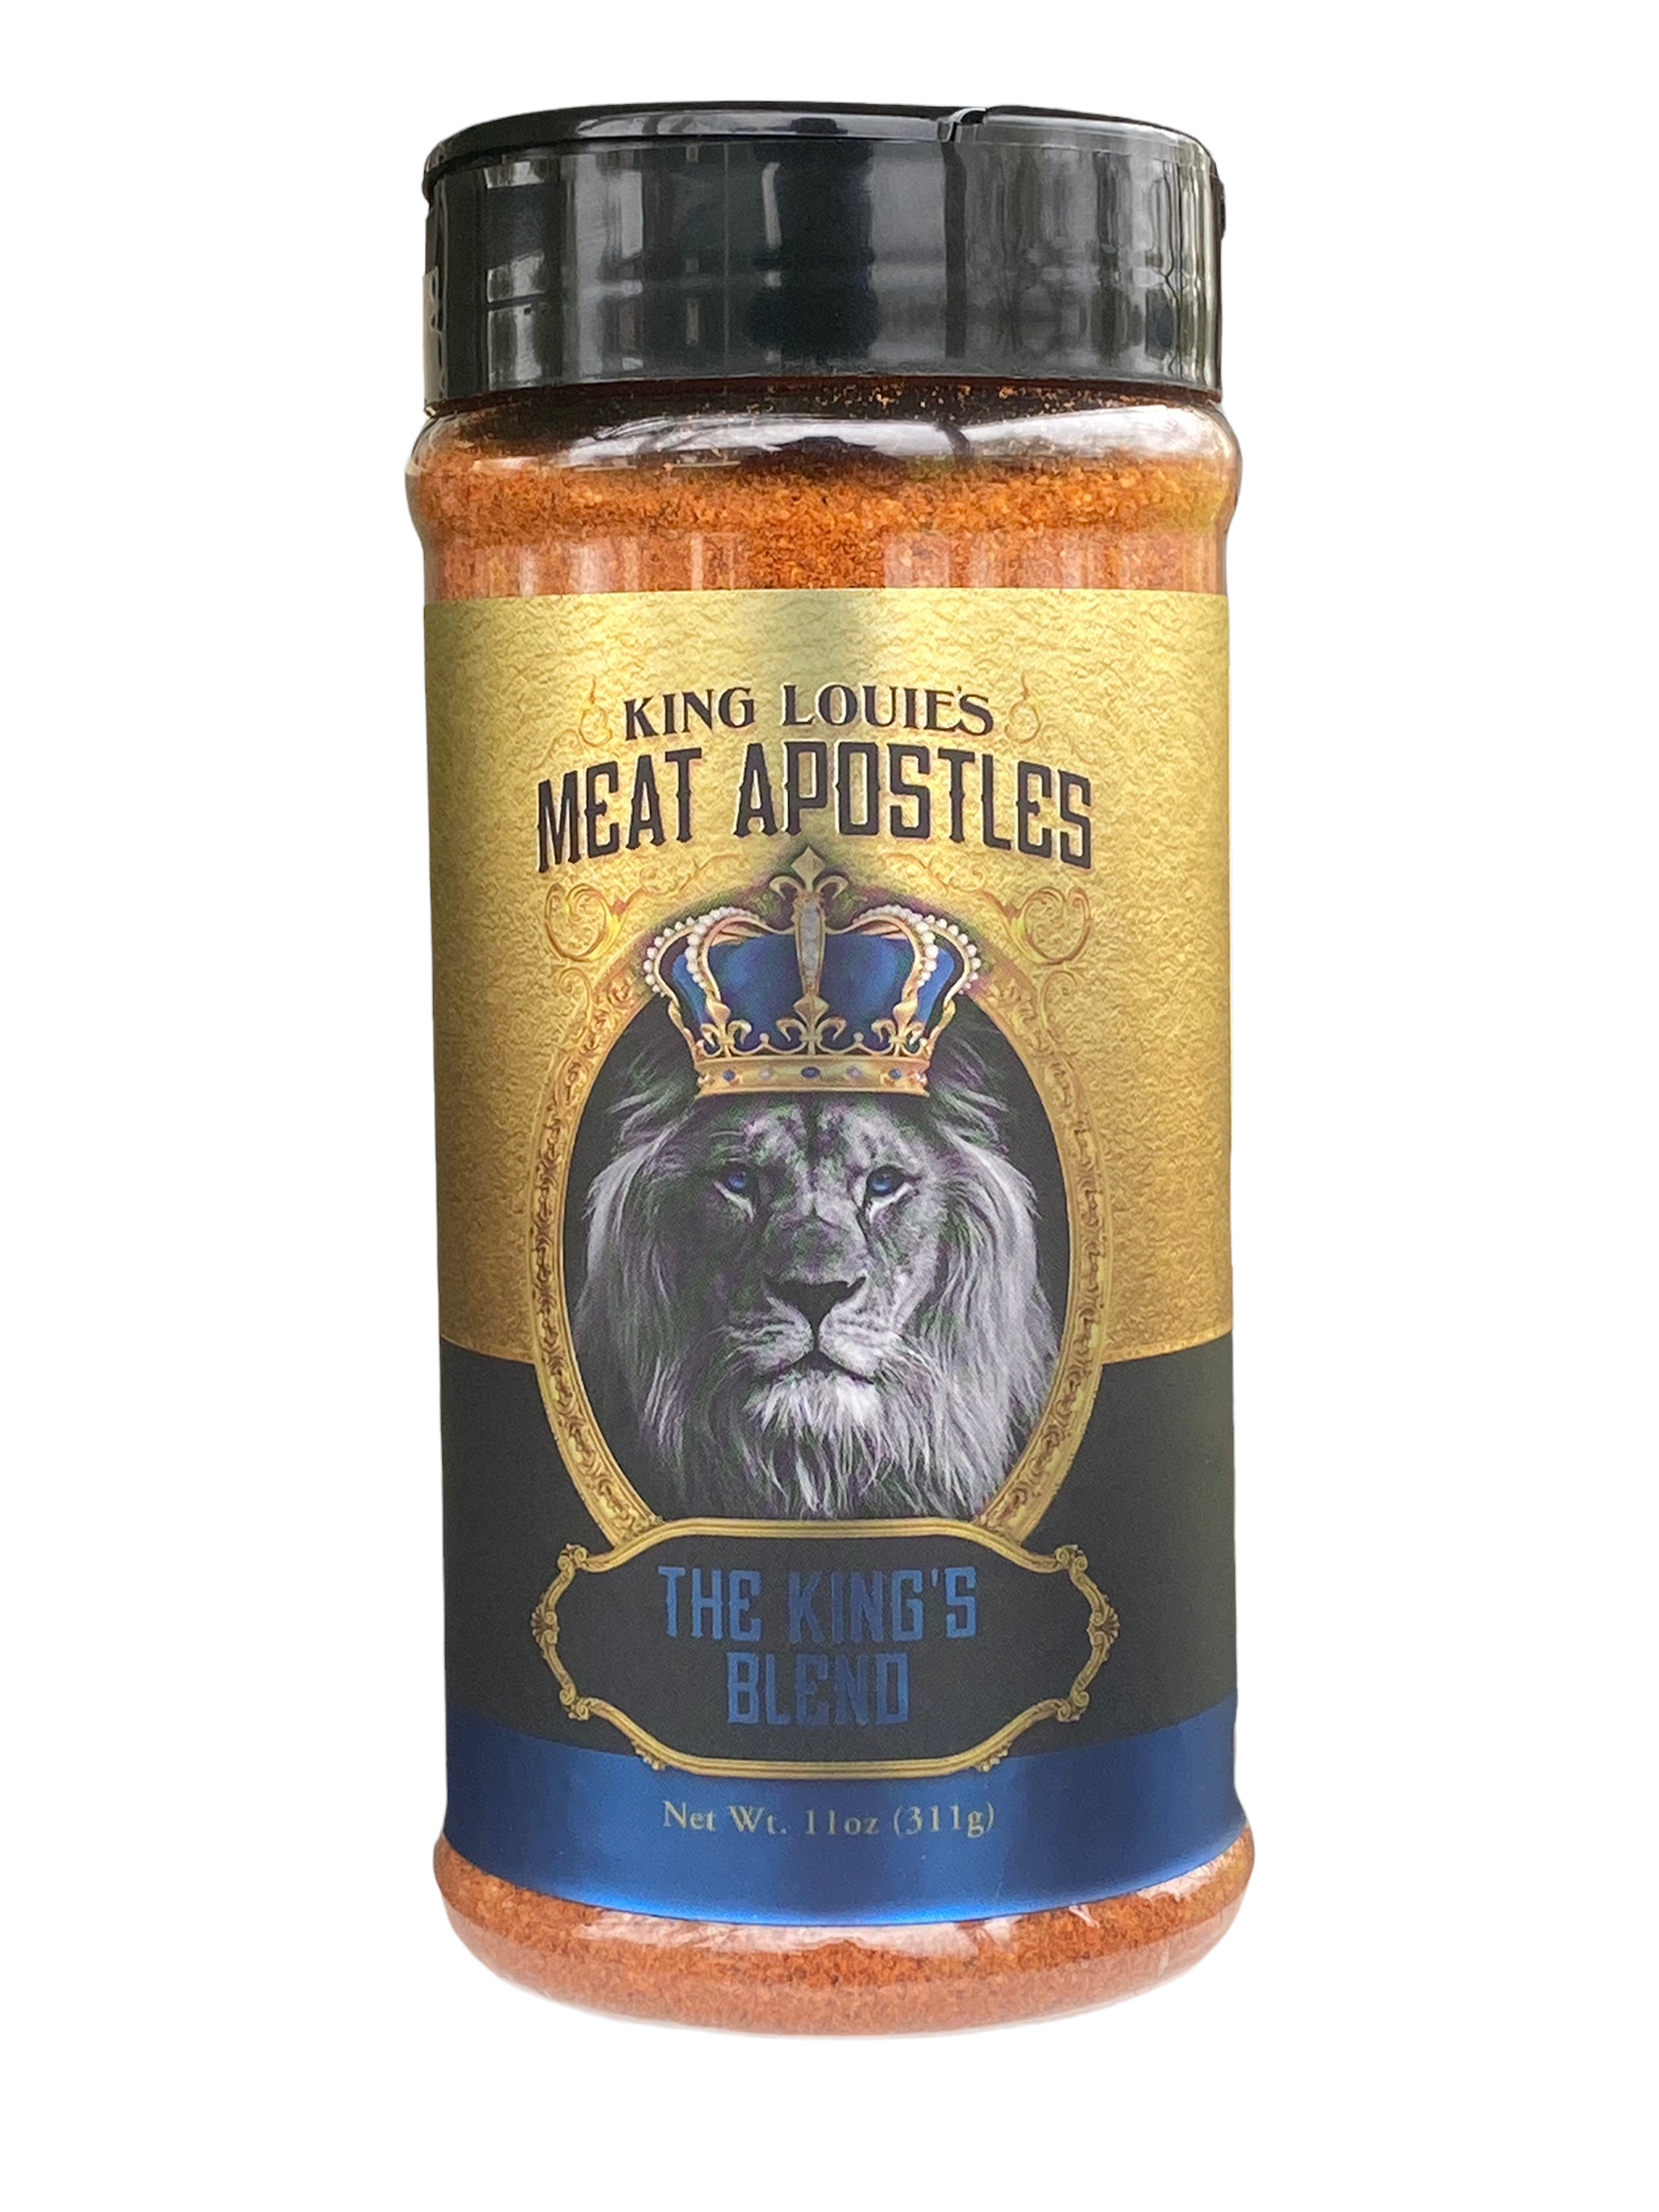 King Louie's Meat Apostles - The King's Blend